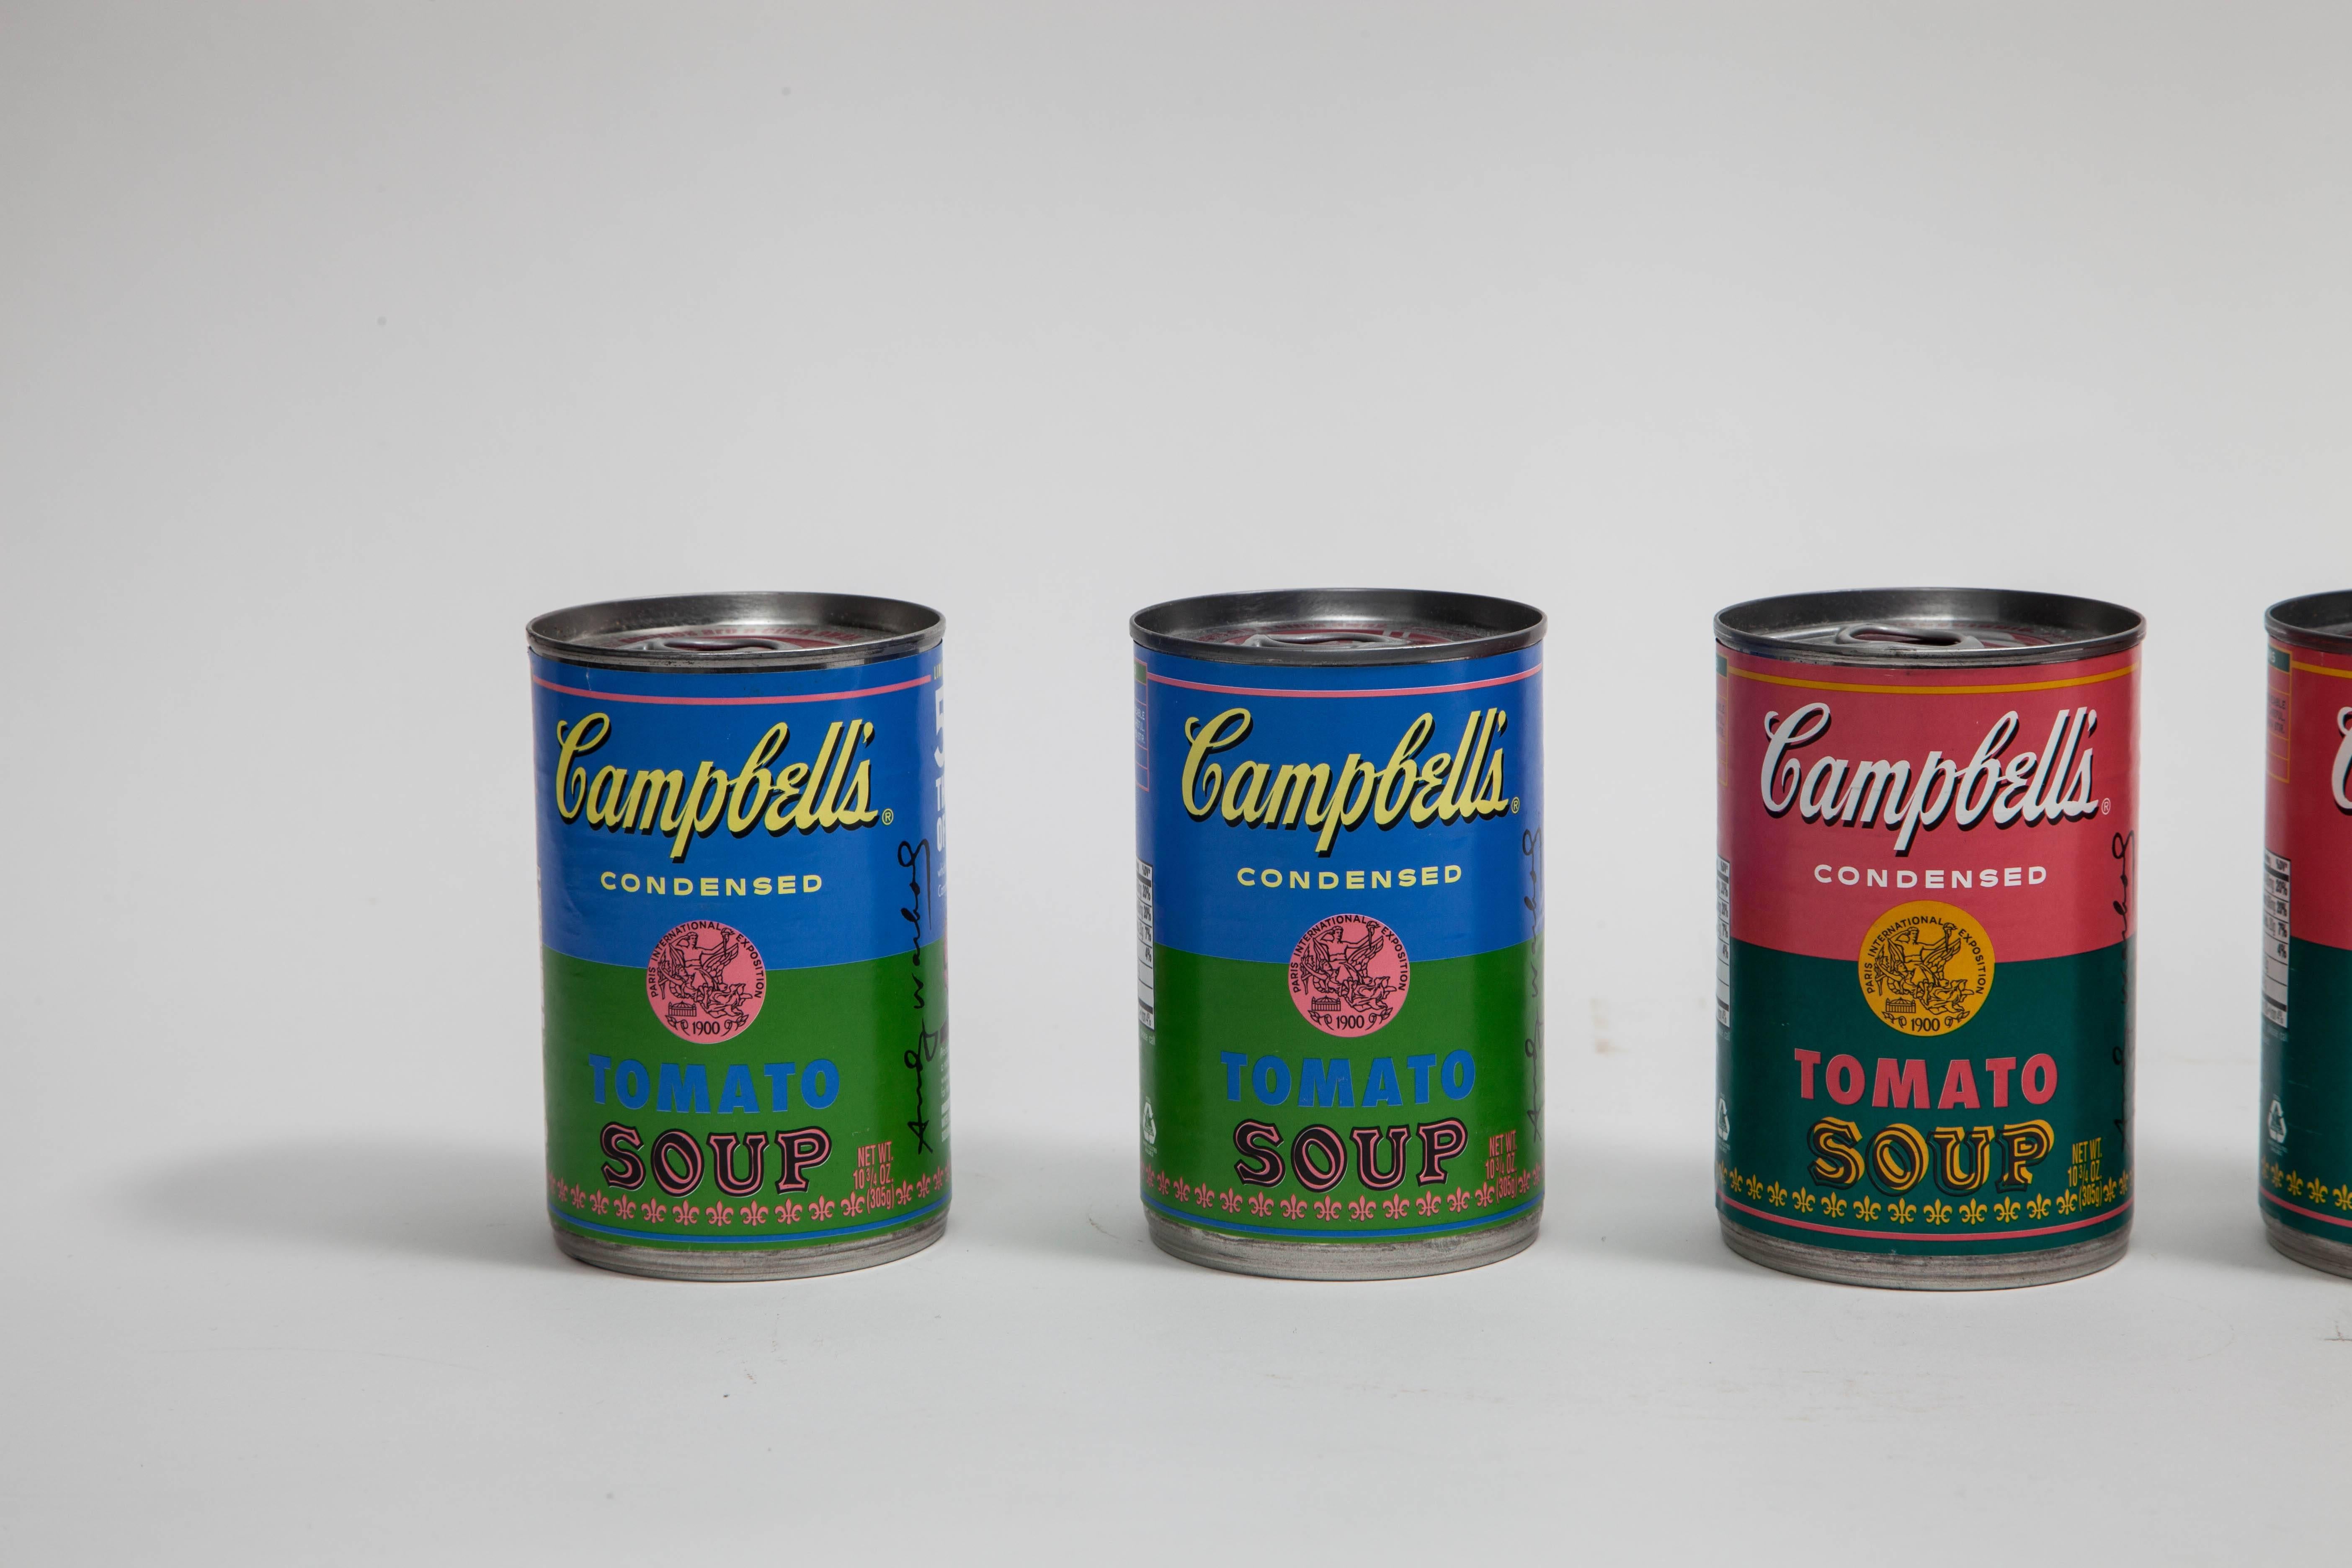 After Andy Warhol Campbell's soup cans 50th anniversary limited edition USA, 2012. Set of four limited edition Pop Art soup cans, commemorating the 50th anniversary of Andy Warhol's first soup can paintings in 1962. Authorized by the Andy Warhol